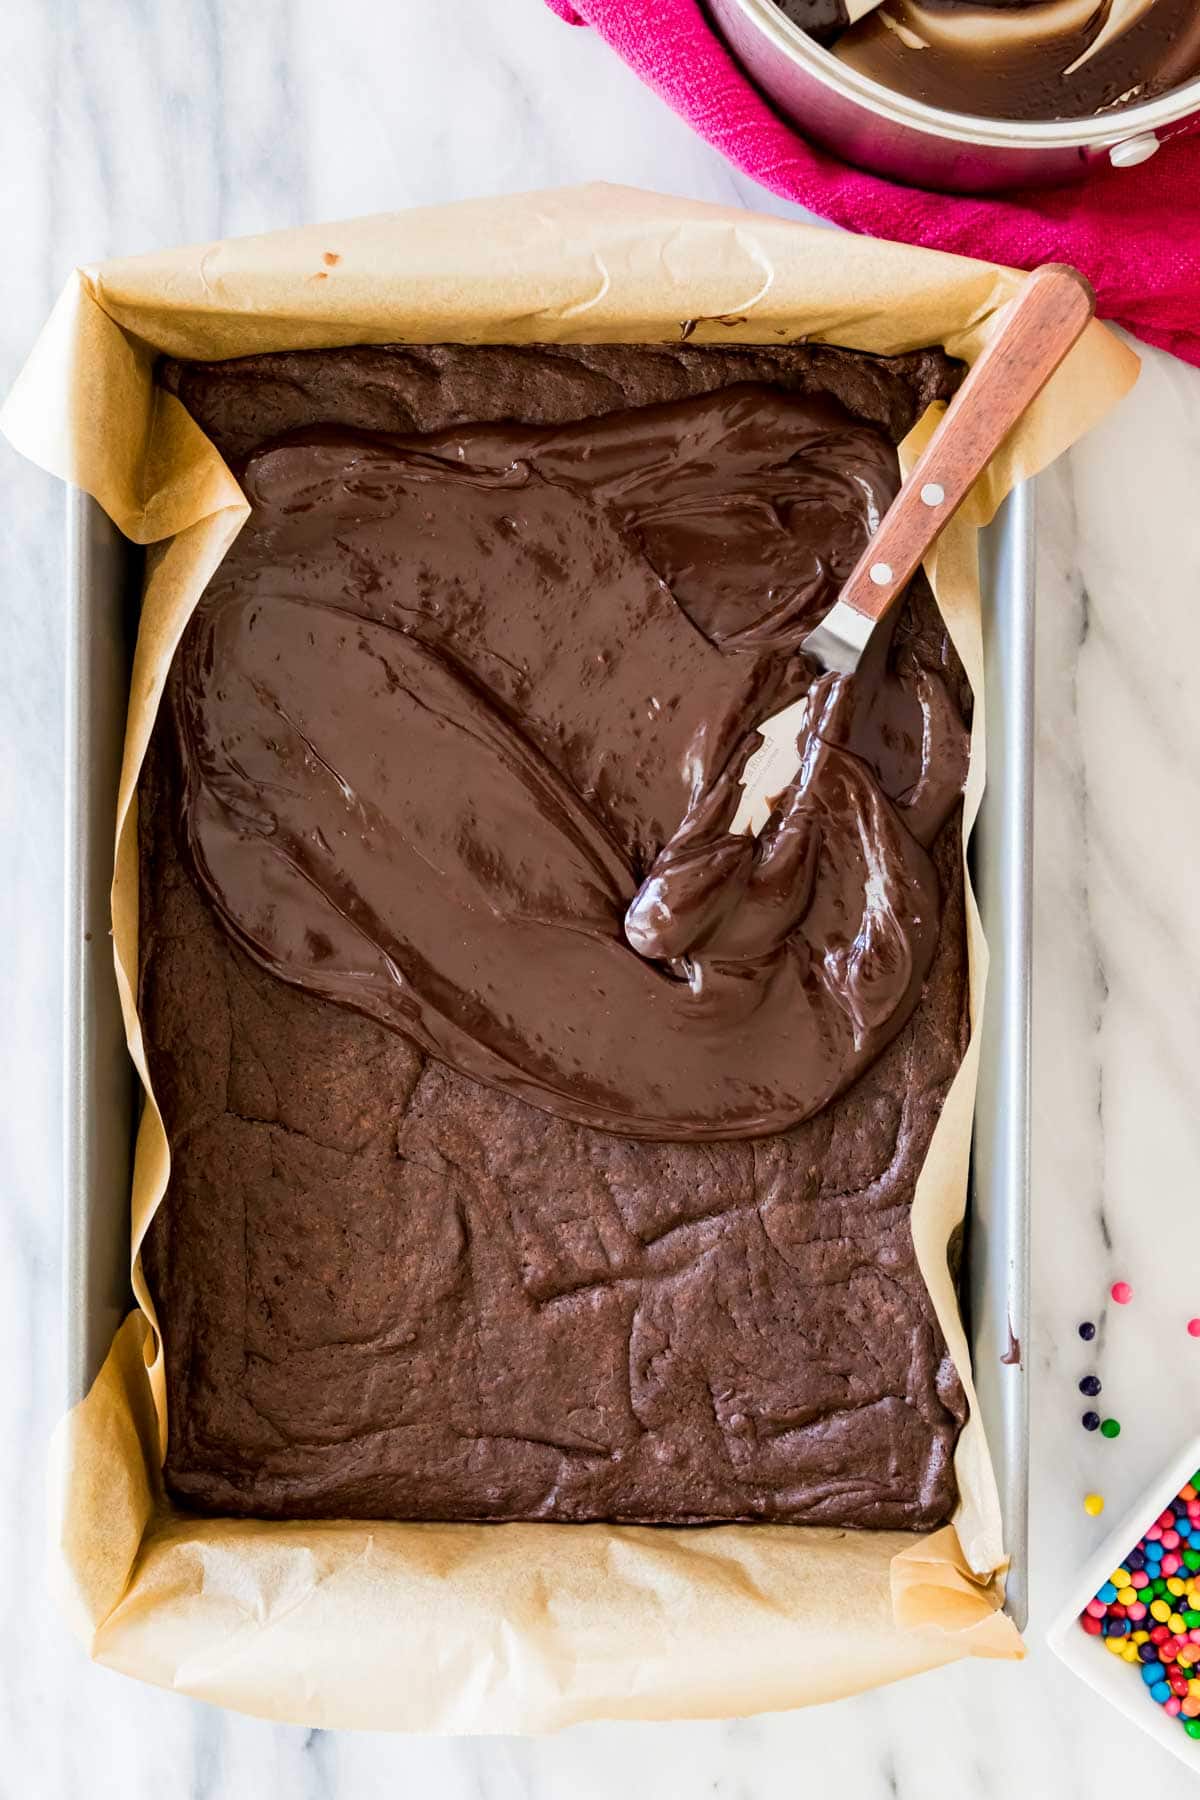 Fudgy chocolate frosting being spread onto a pan of brownies.